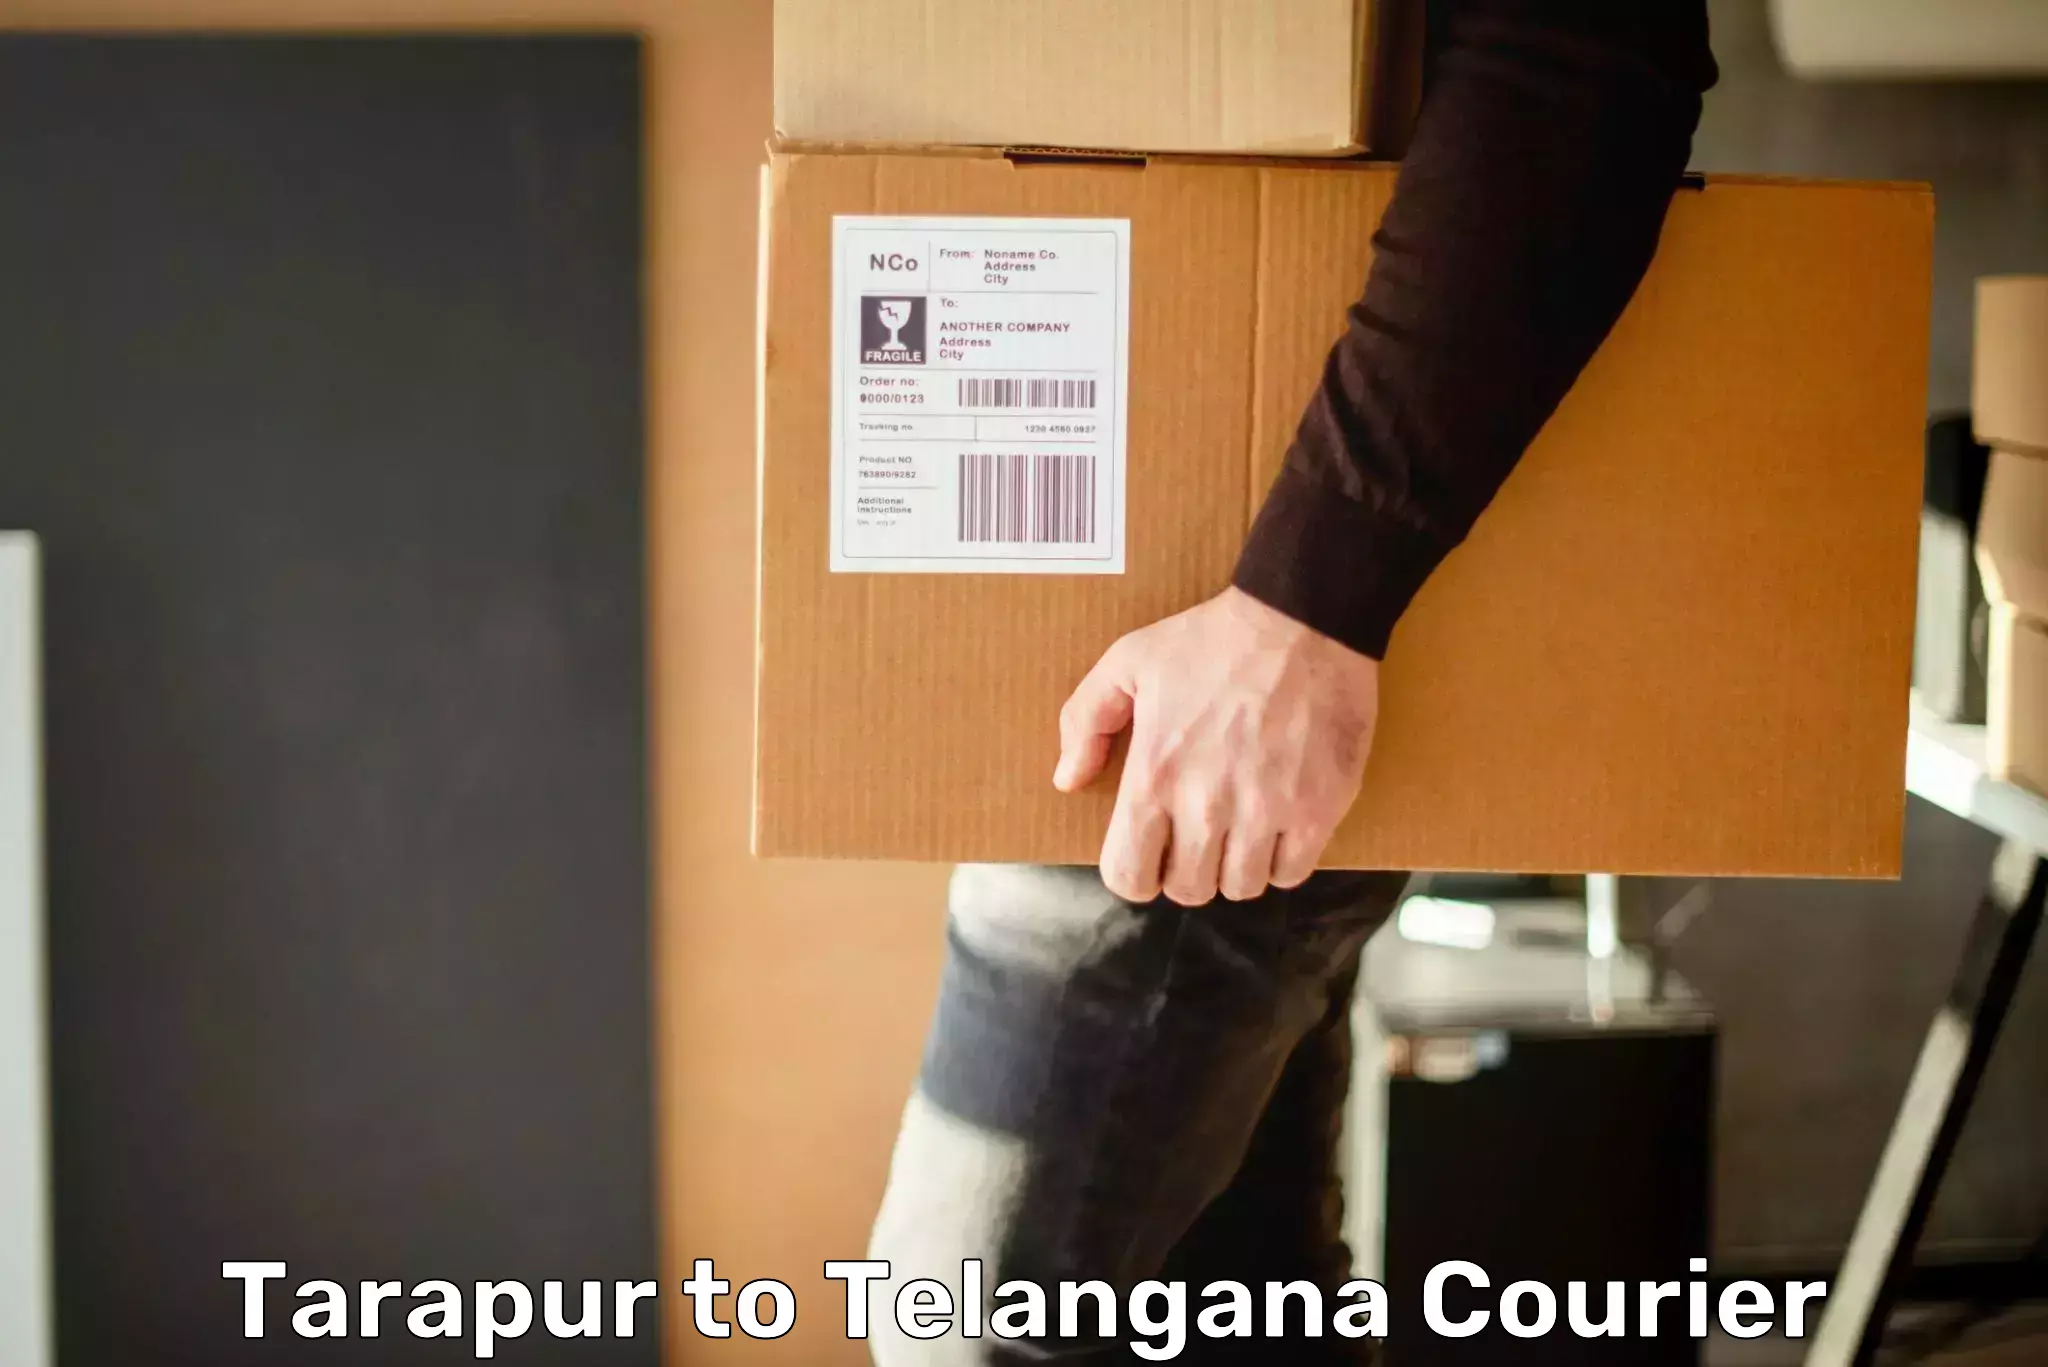 User-friendly delivery service Tarapur to Telangana